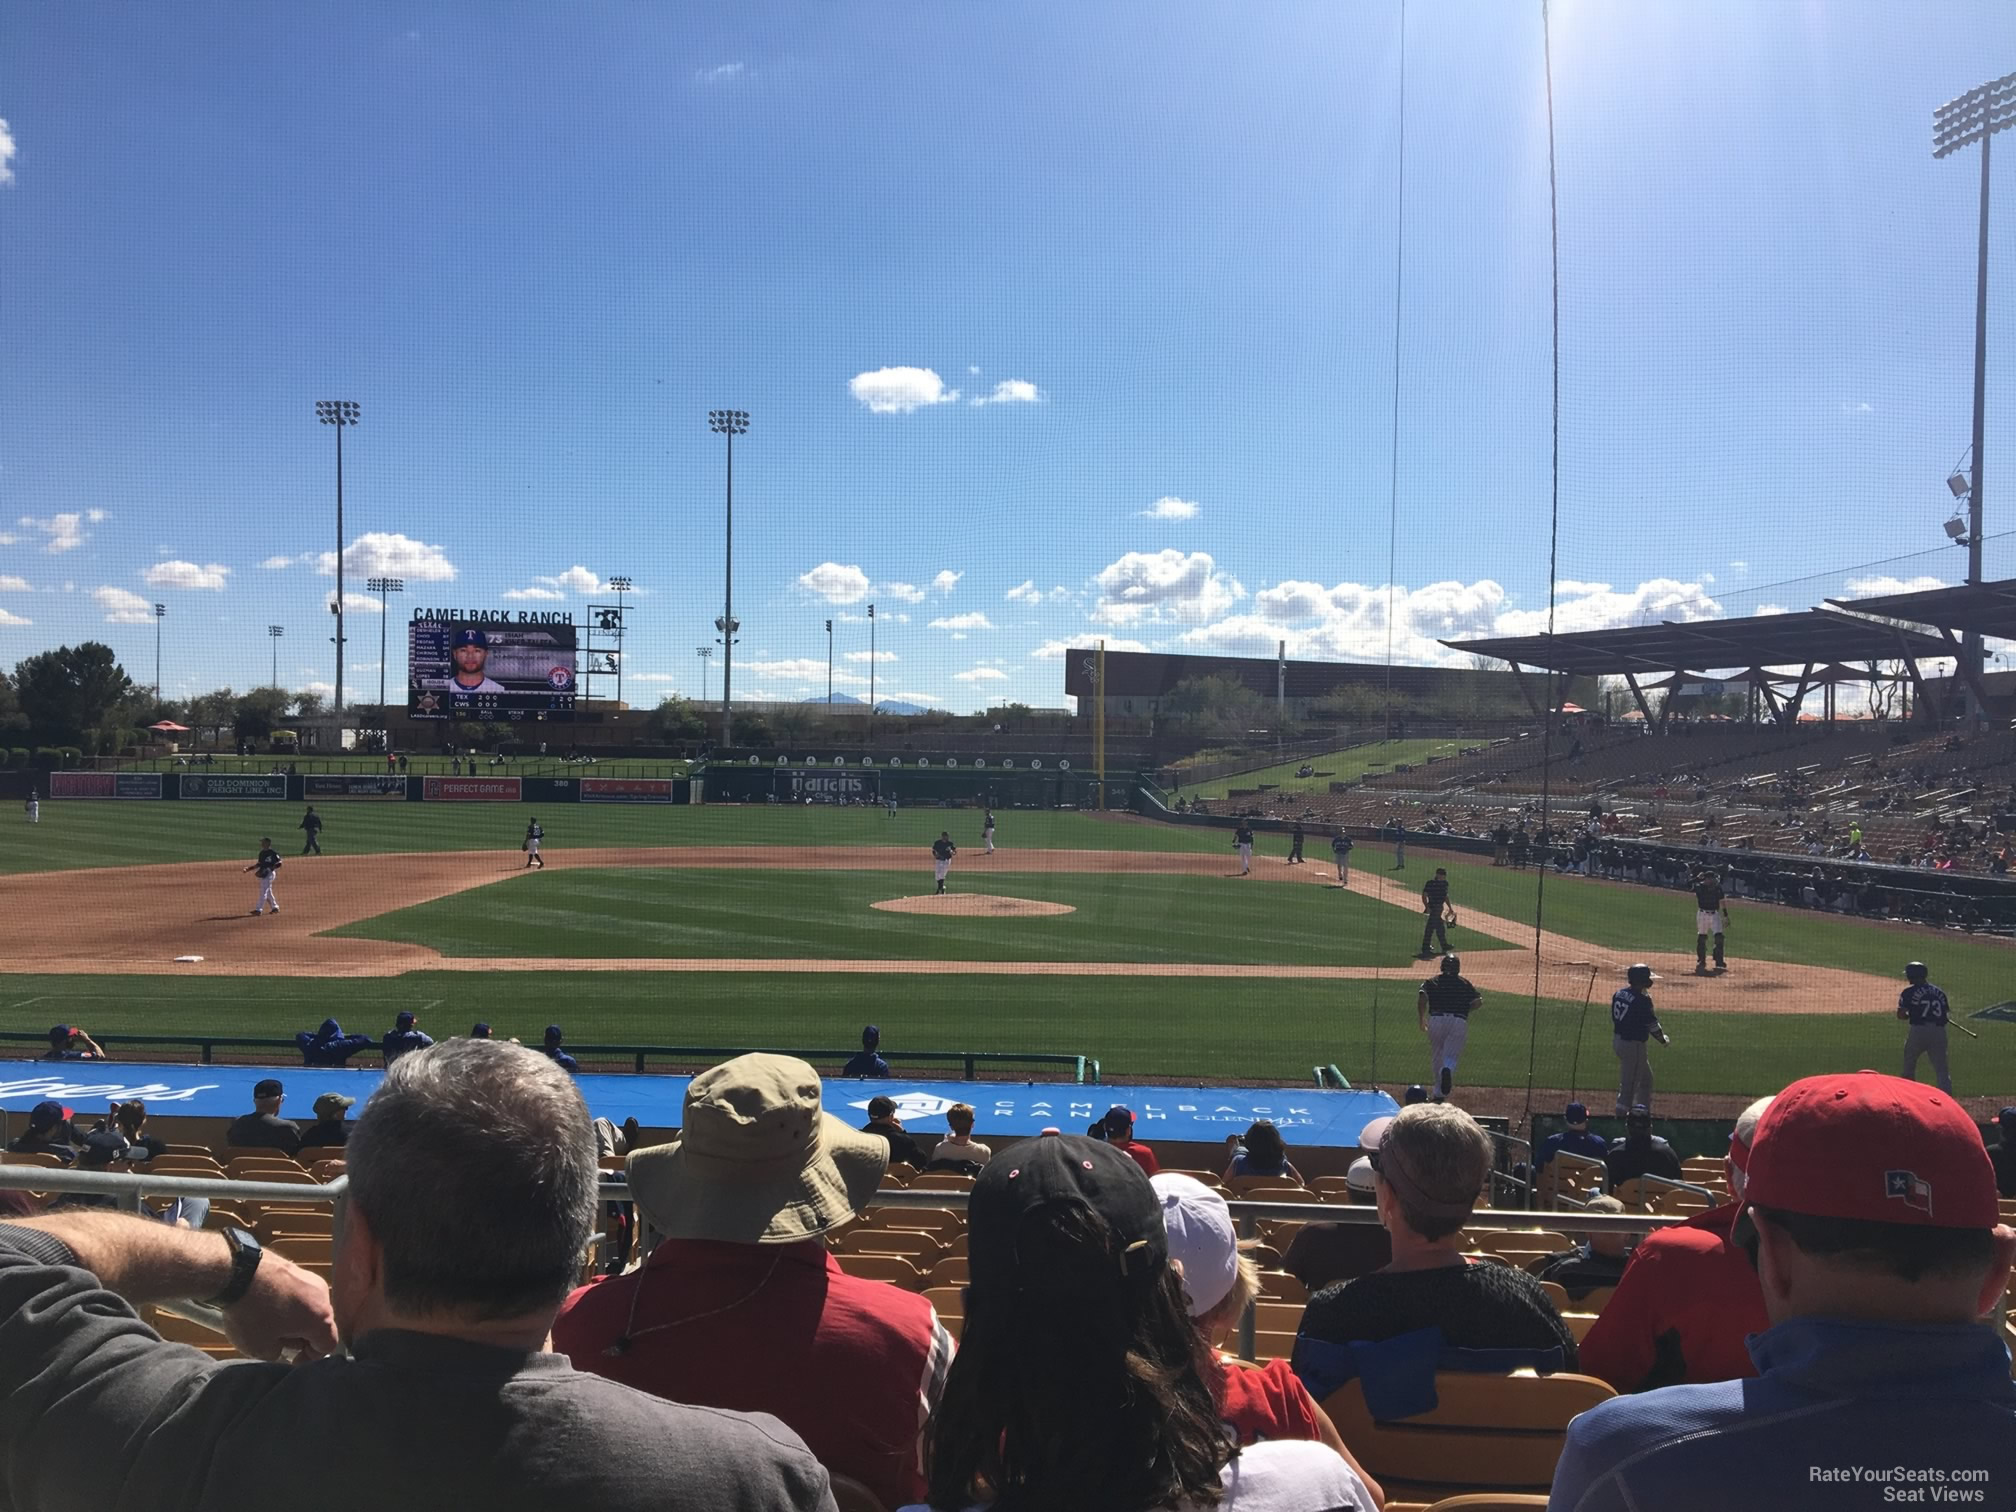 section 120, row 5 seat view  - camelback ranch